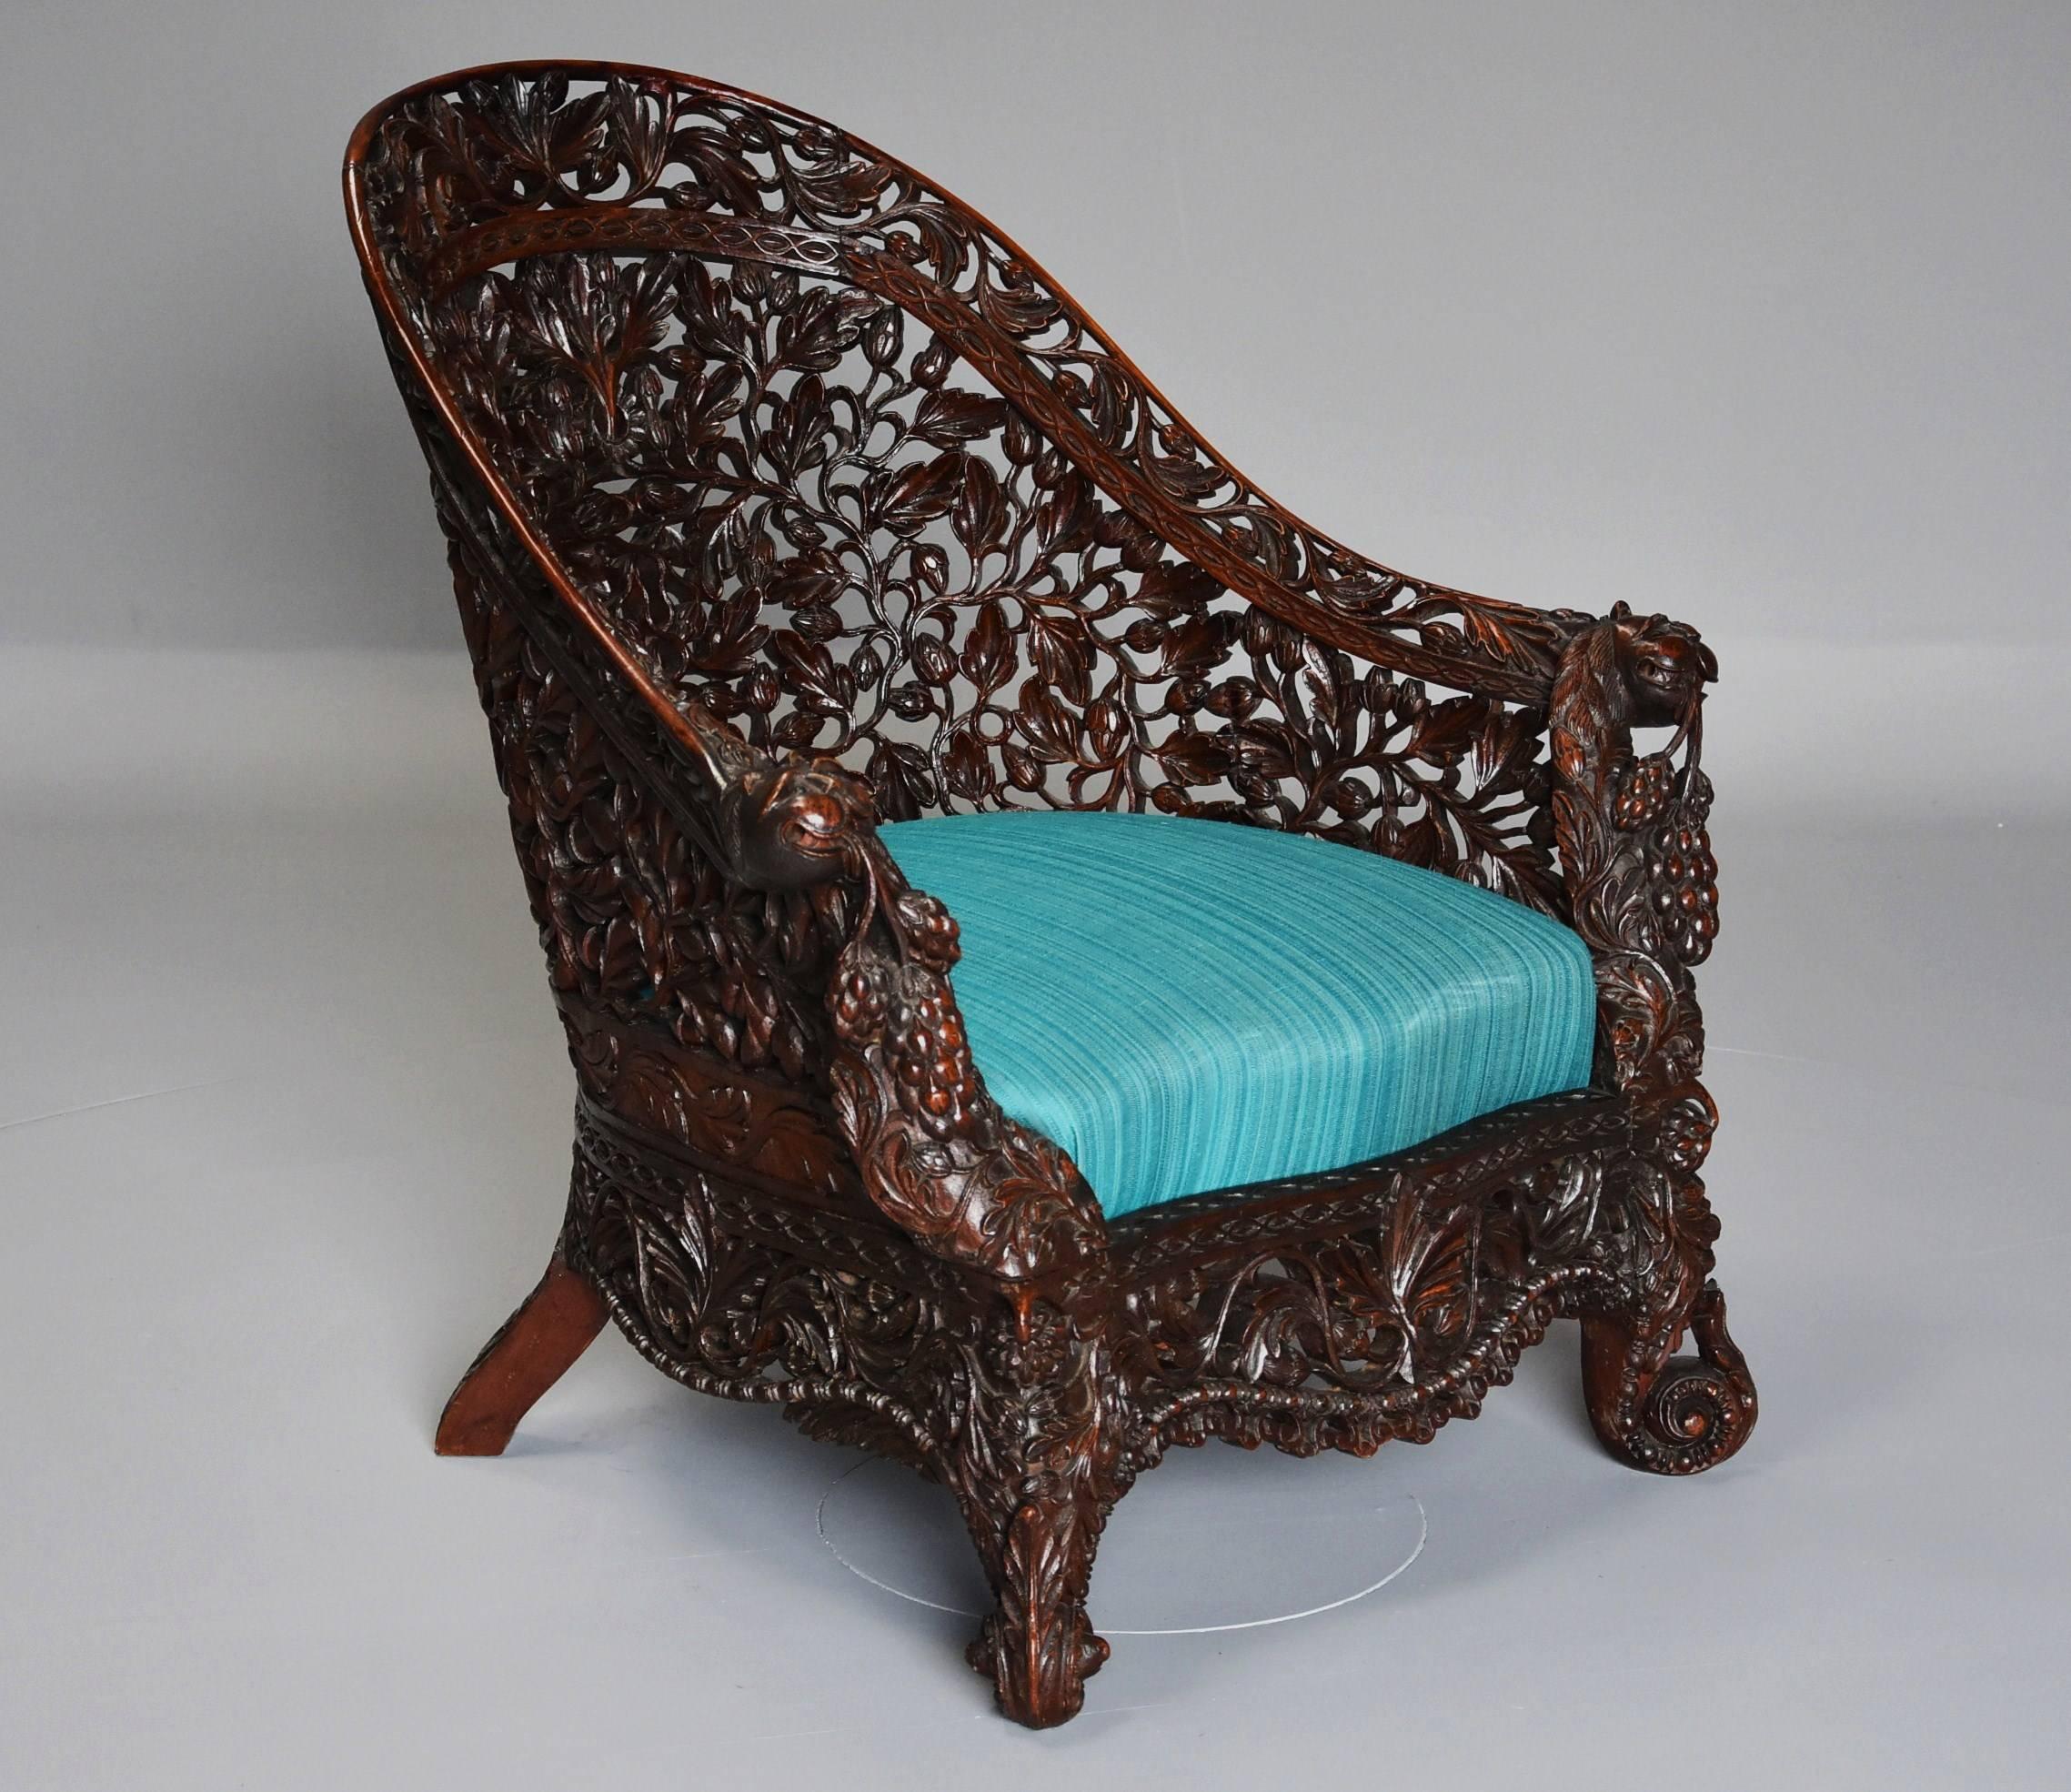 Hardwood Rare Highly Decorative 19th Century Profusely Carved Indian Armchair